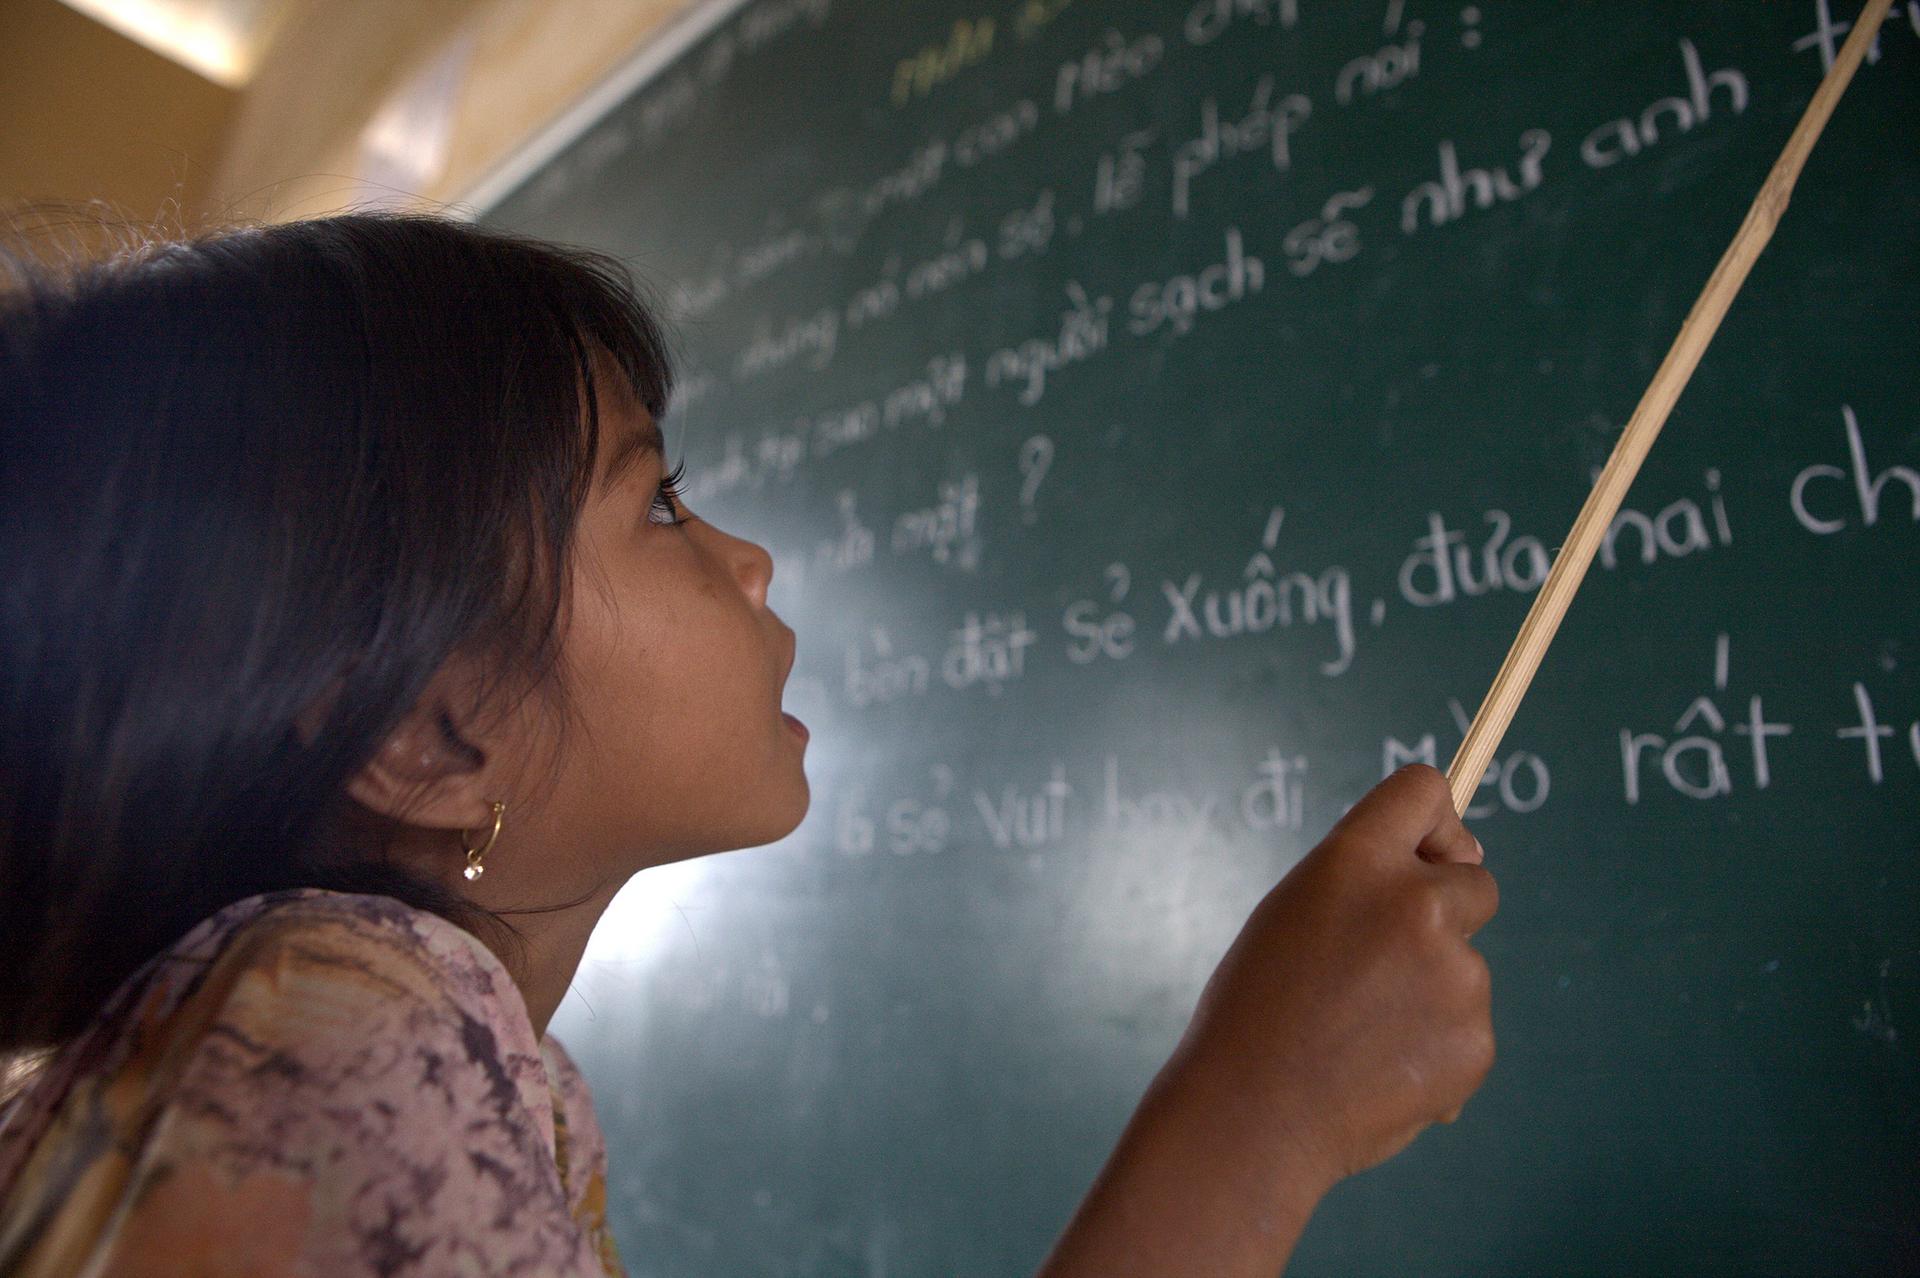 A student of Khmer descent learns Kinh language (the official Vietnamese language) at the Lac Hoa Primary School in Soc Trang province.